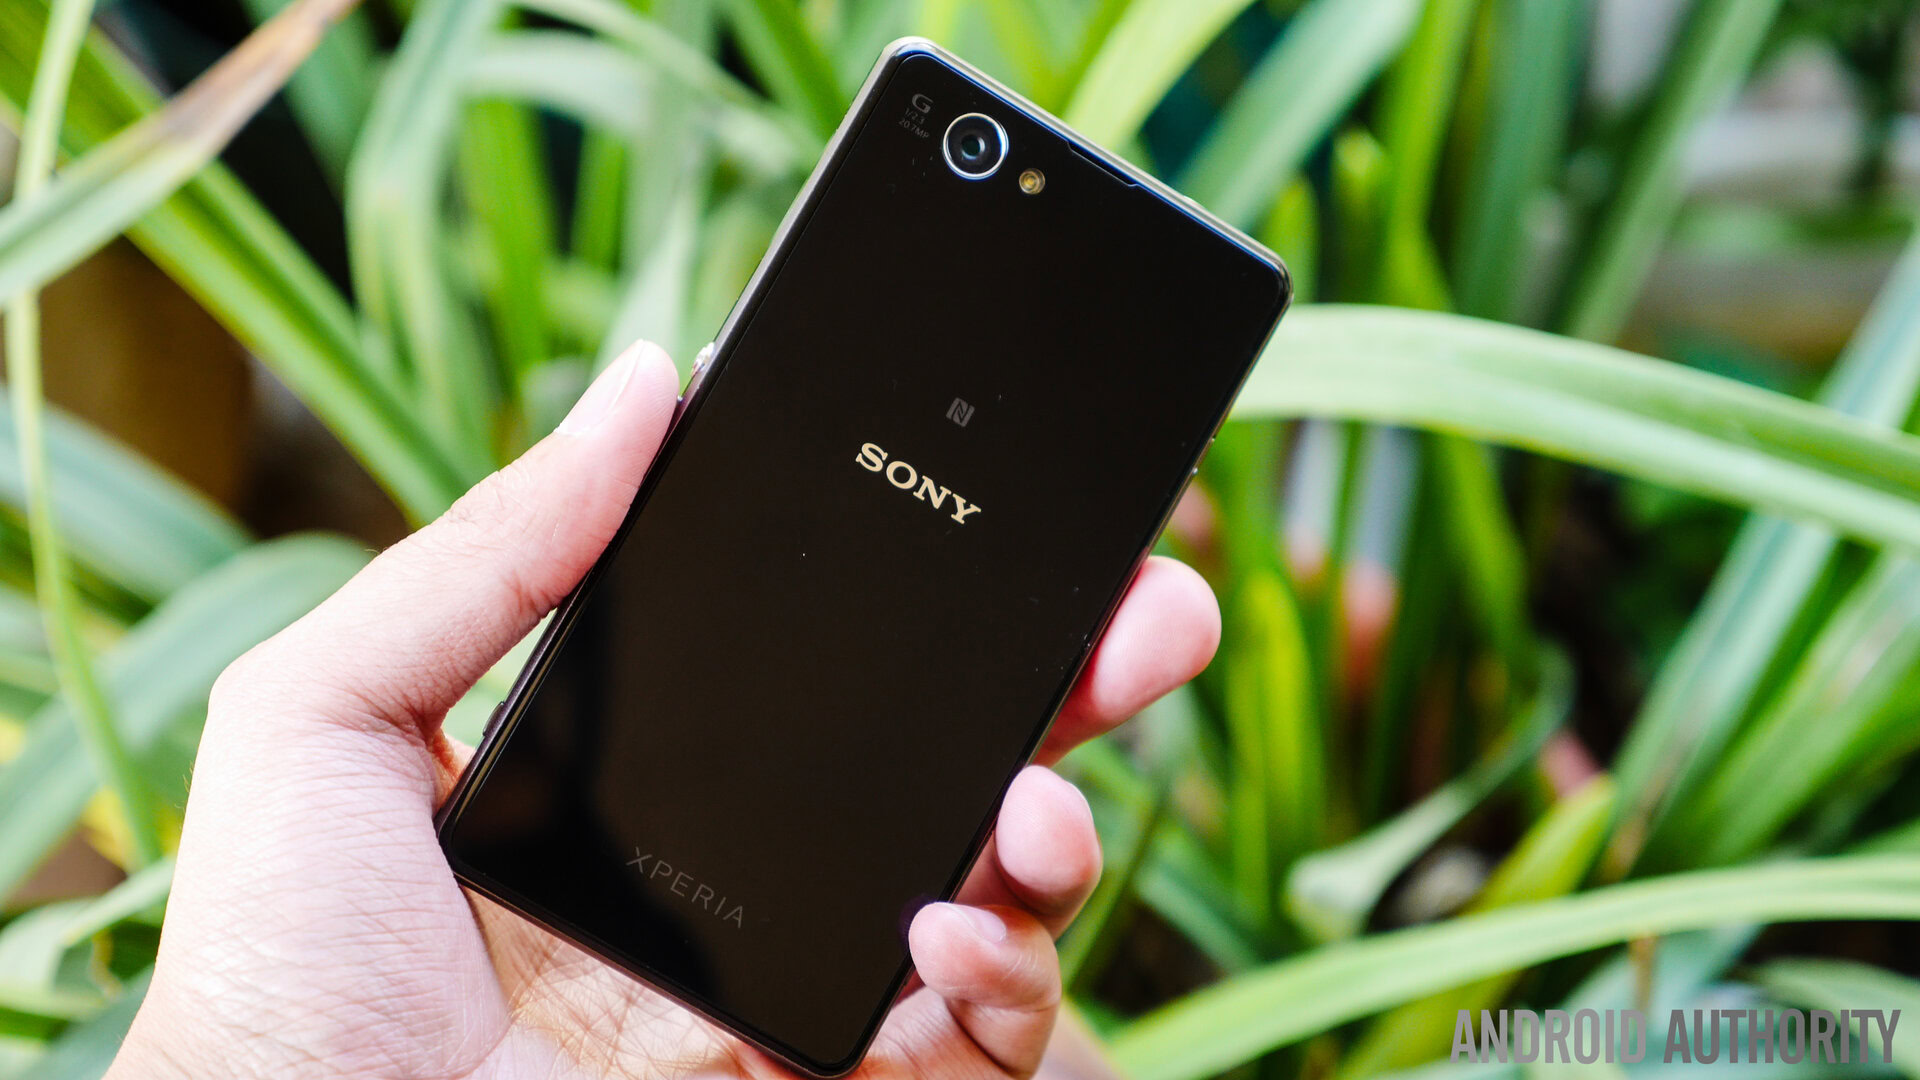 Flitsend katje Abnormaal Sony Xperia Z1 Compact Review - Android Authority